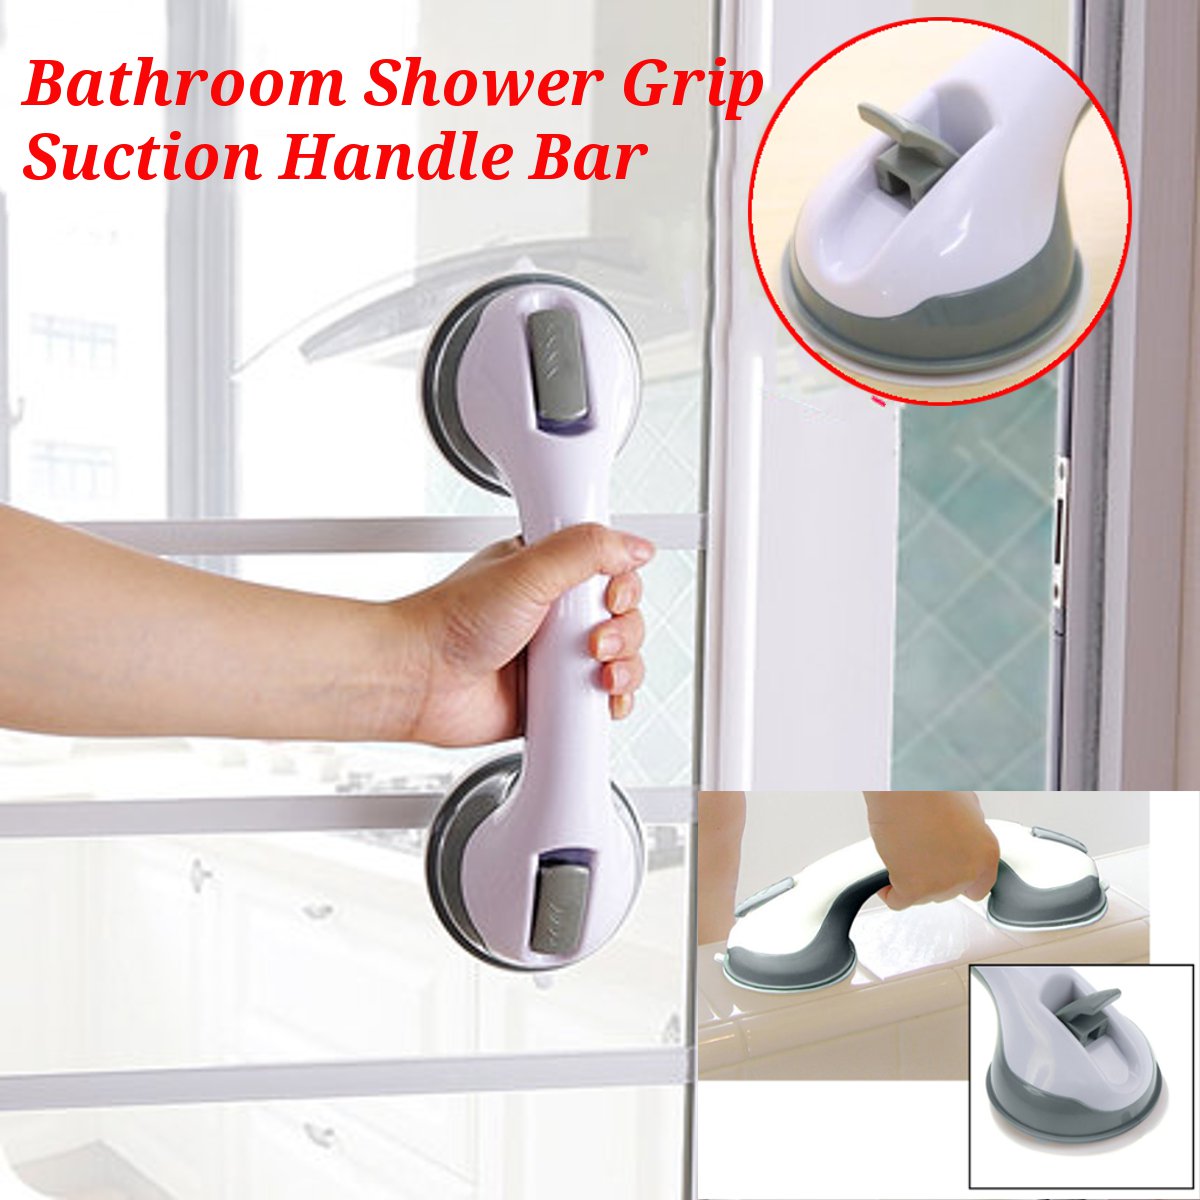 Bathroom Handrail Suction Cup grey color on glass